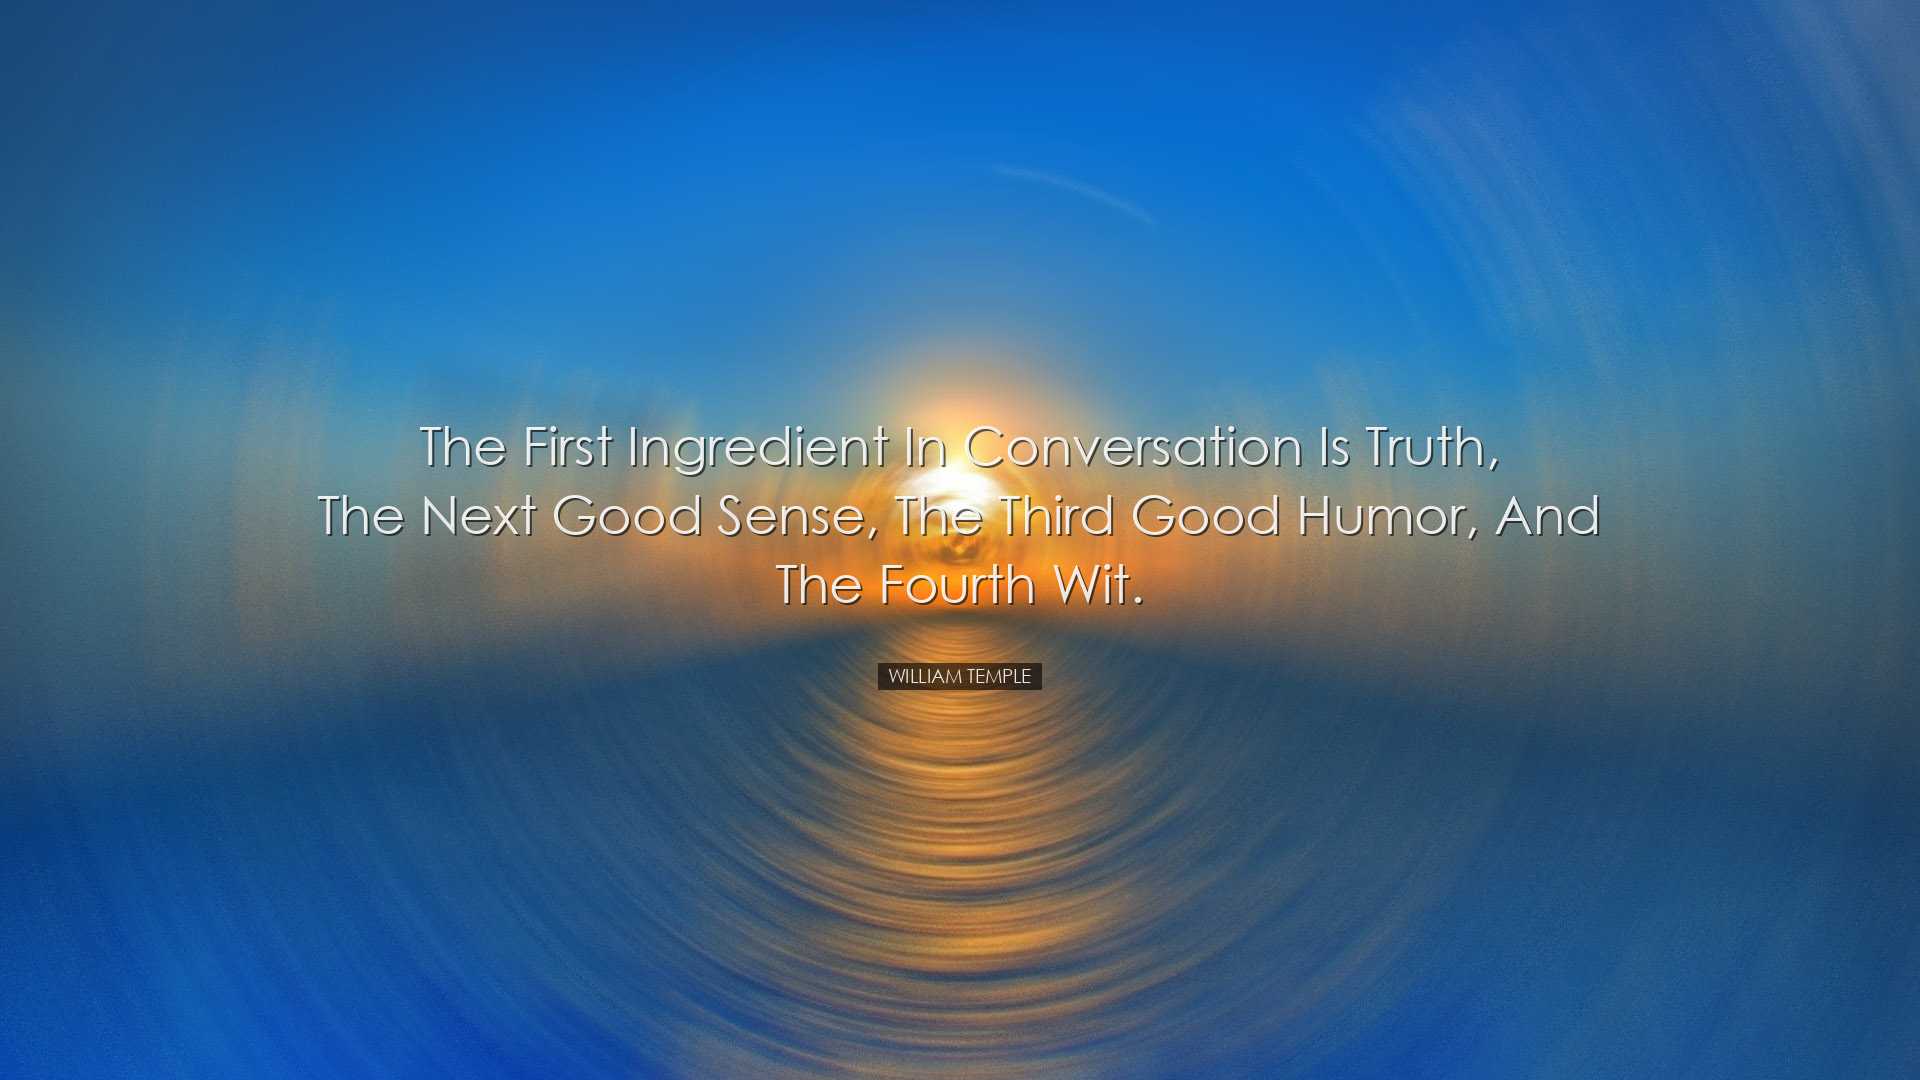 The first ingredient in conversation is truth, the next good sense